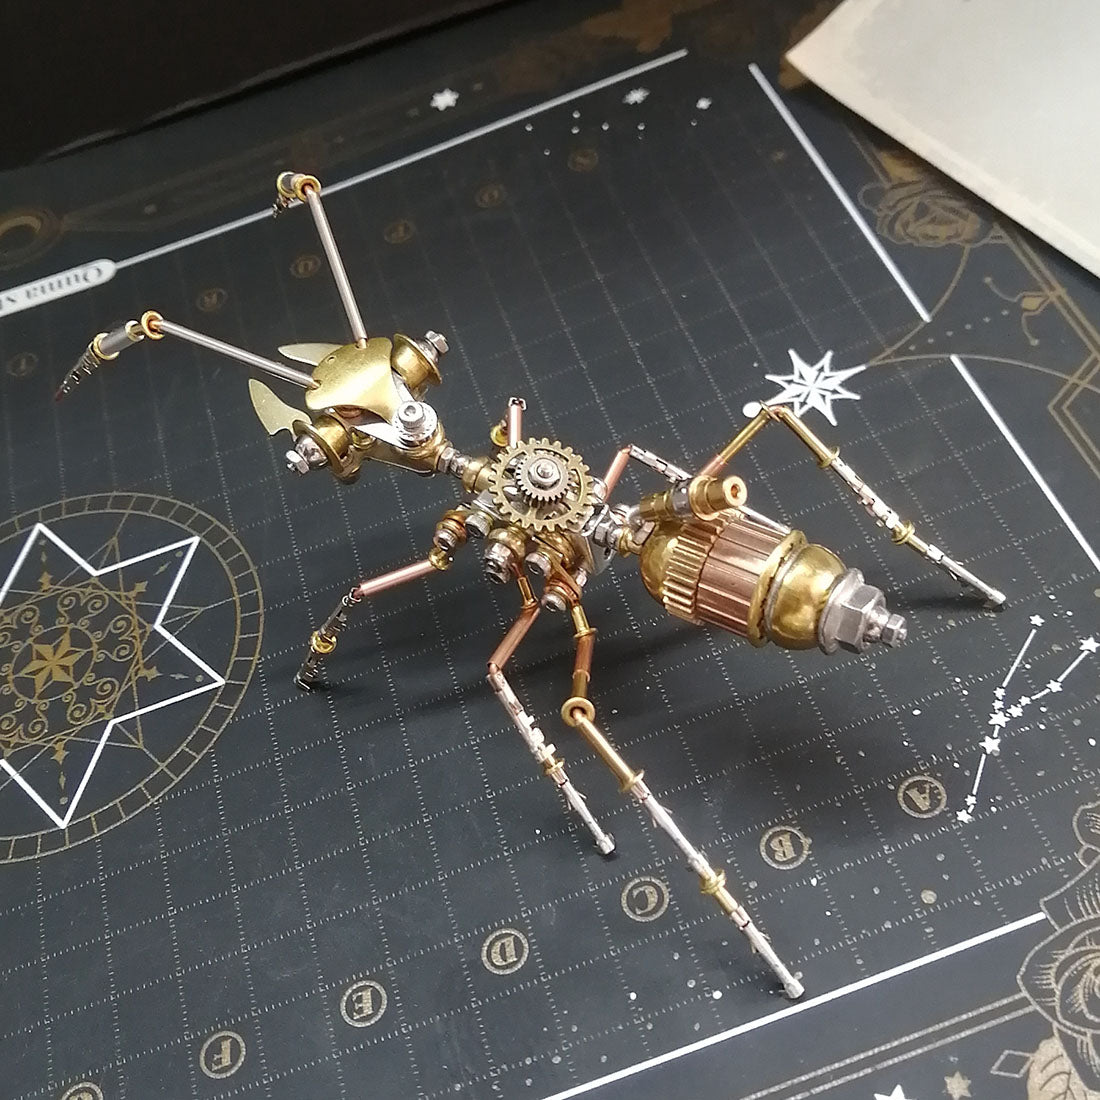 3D Metal Puzzle Little Ant Steampunk Insect DIY Assembly Model 150+PCS